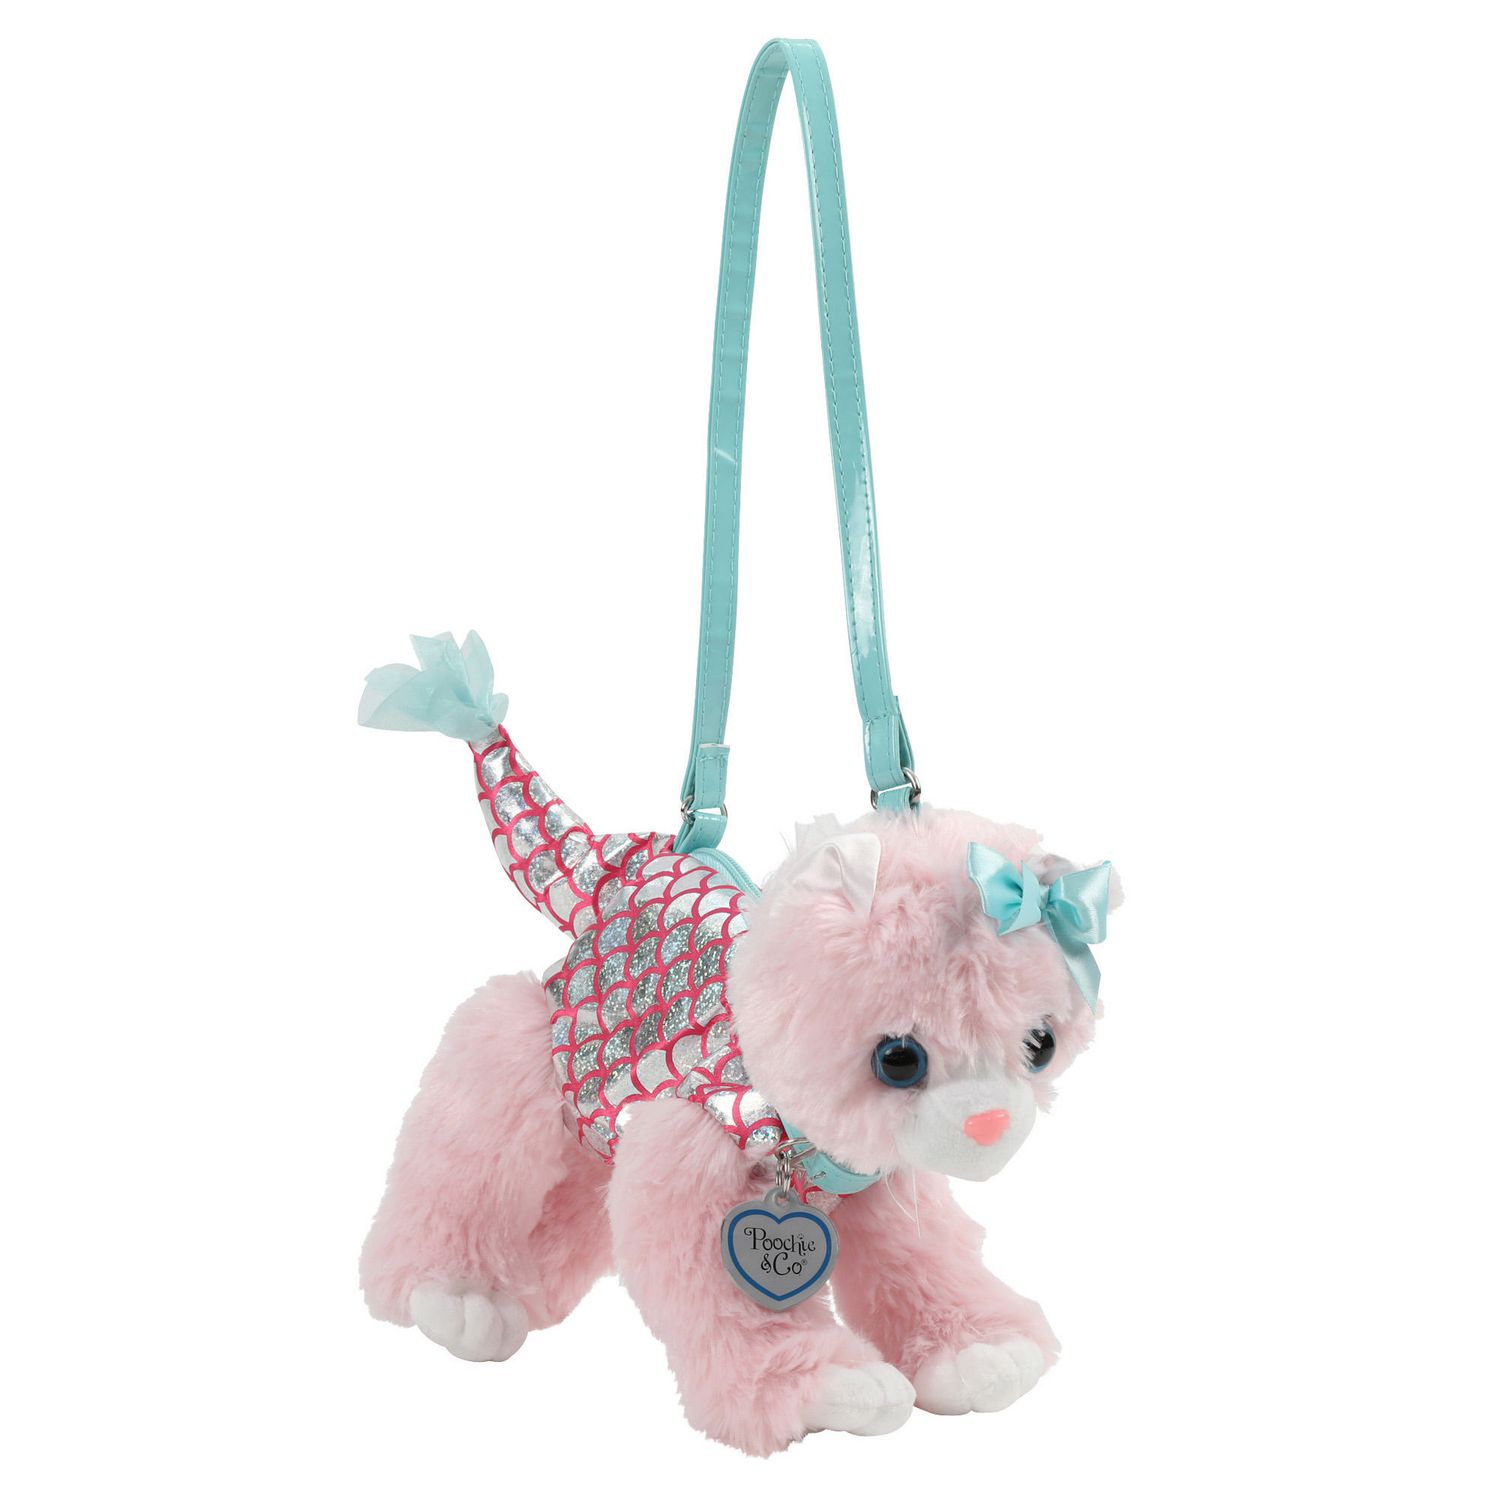 Poochie and Co. Cat with Mermaid Tail Plush Purse | Walmart Canada